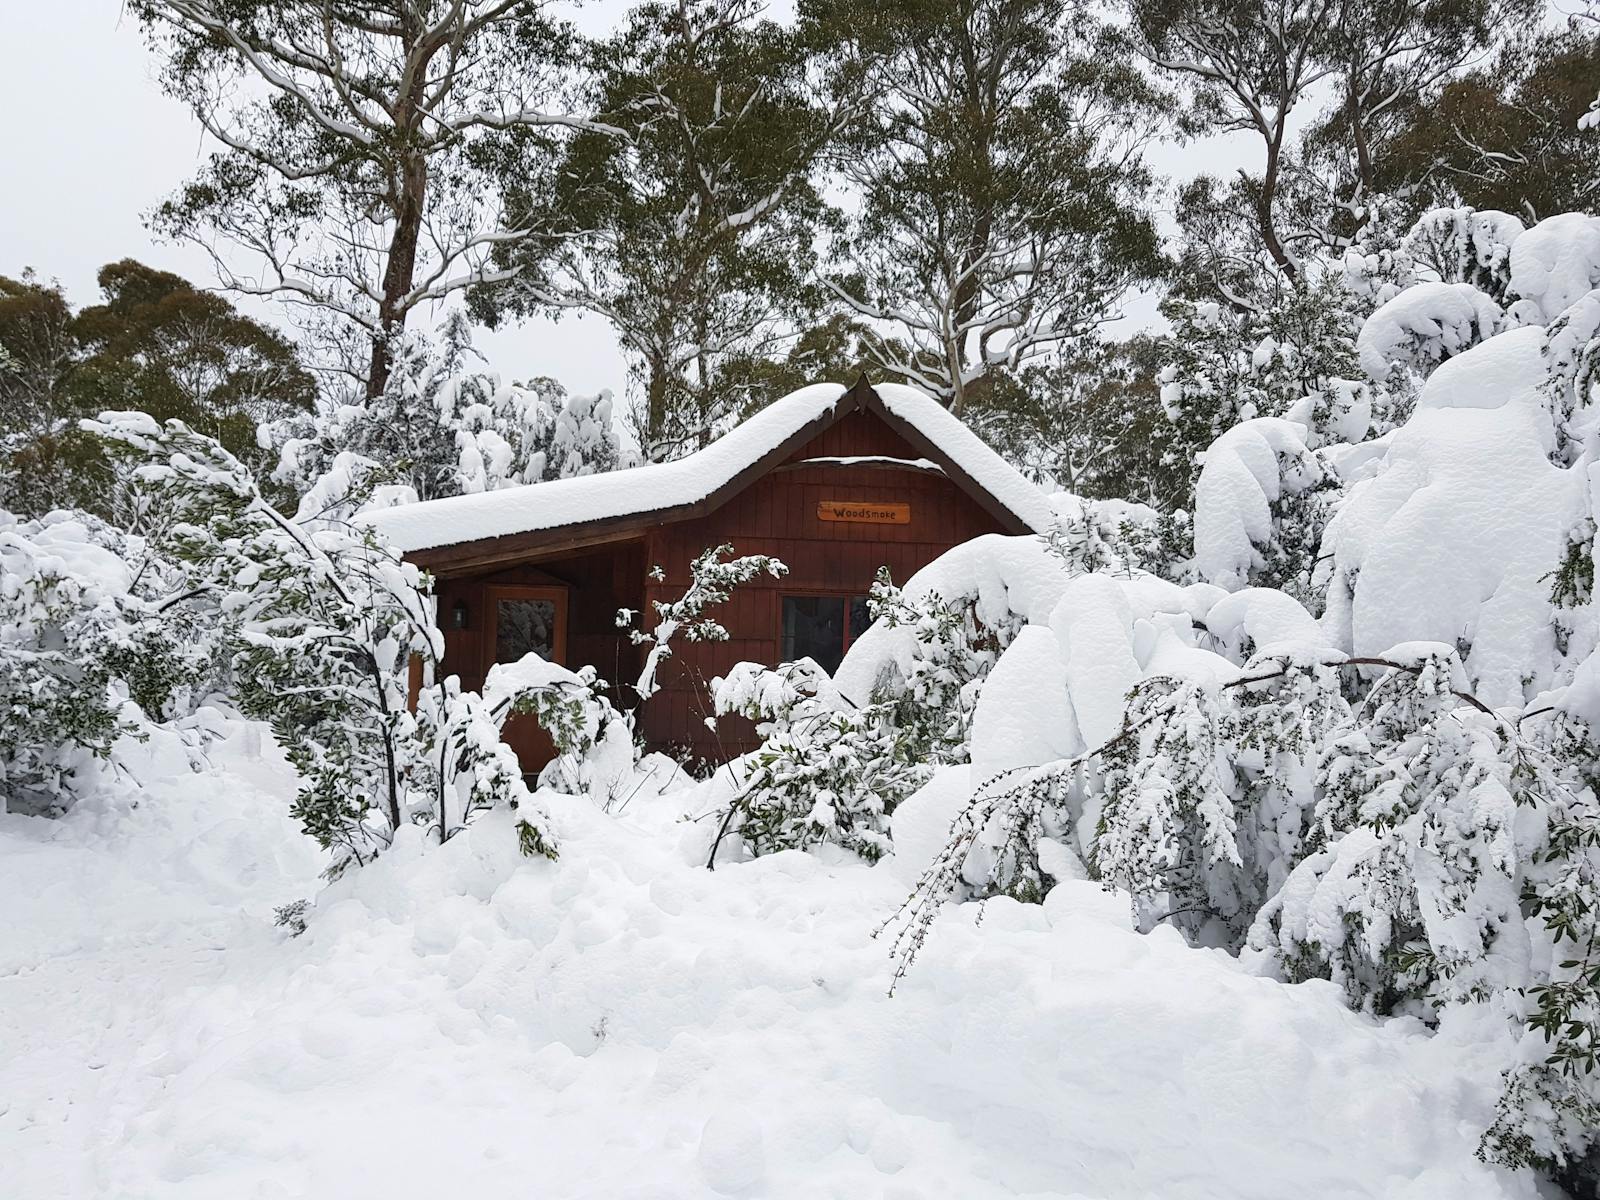 Romantic and cosy accommodation at Cradle Mountain Highlanders Cradle Mountain